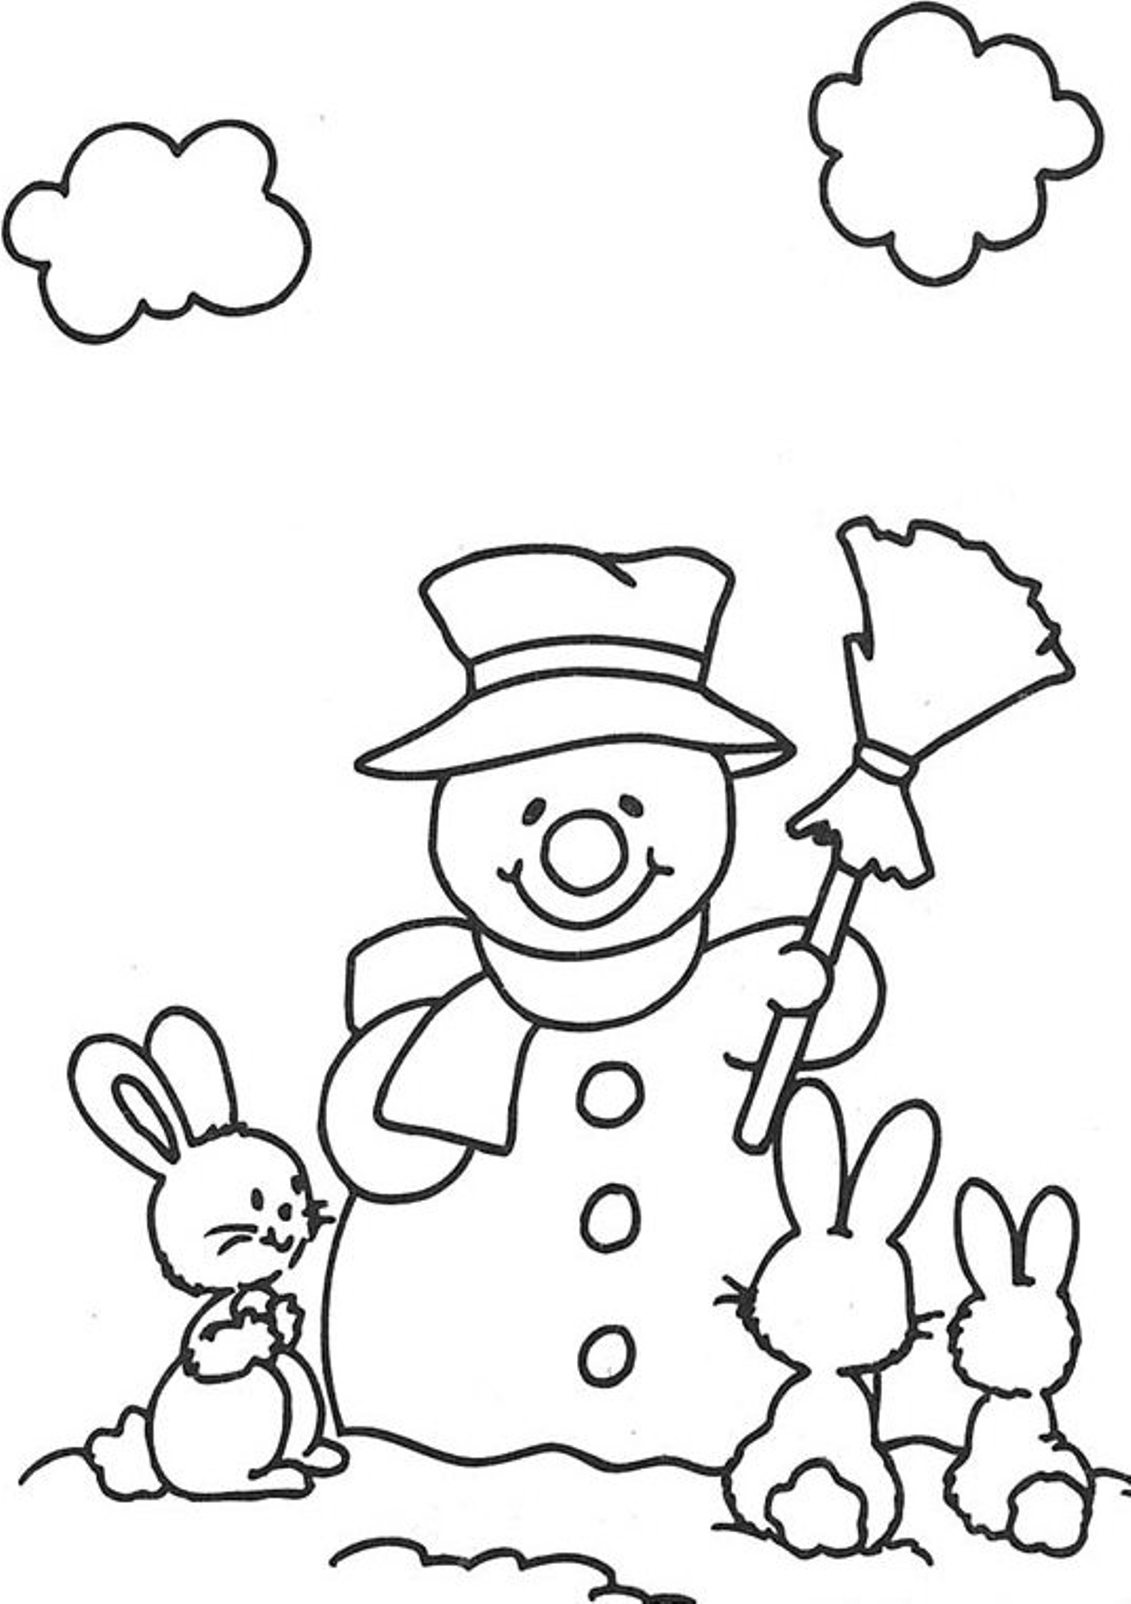 Rabbits And Snowman S1bea Coloring Page